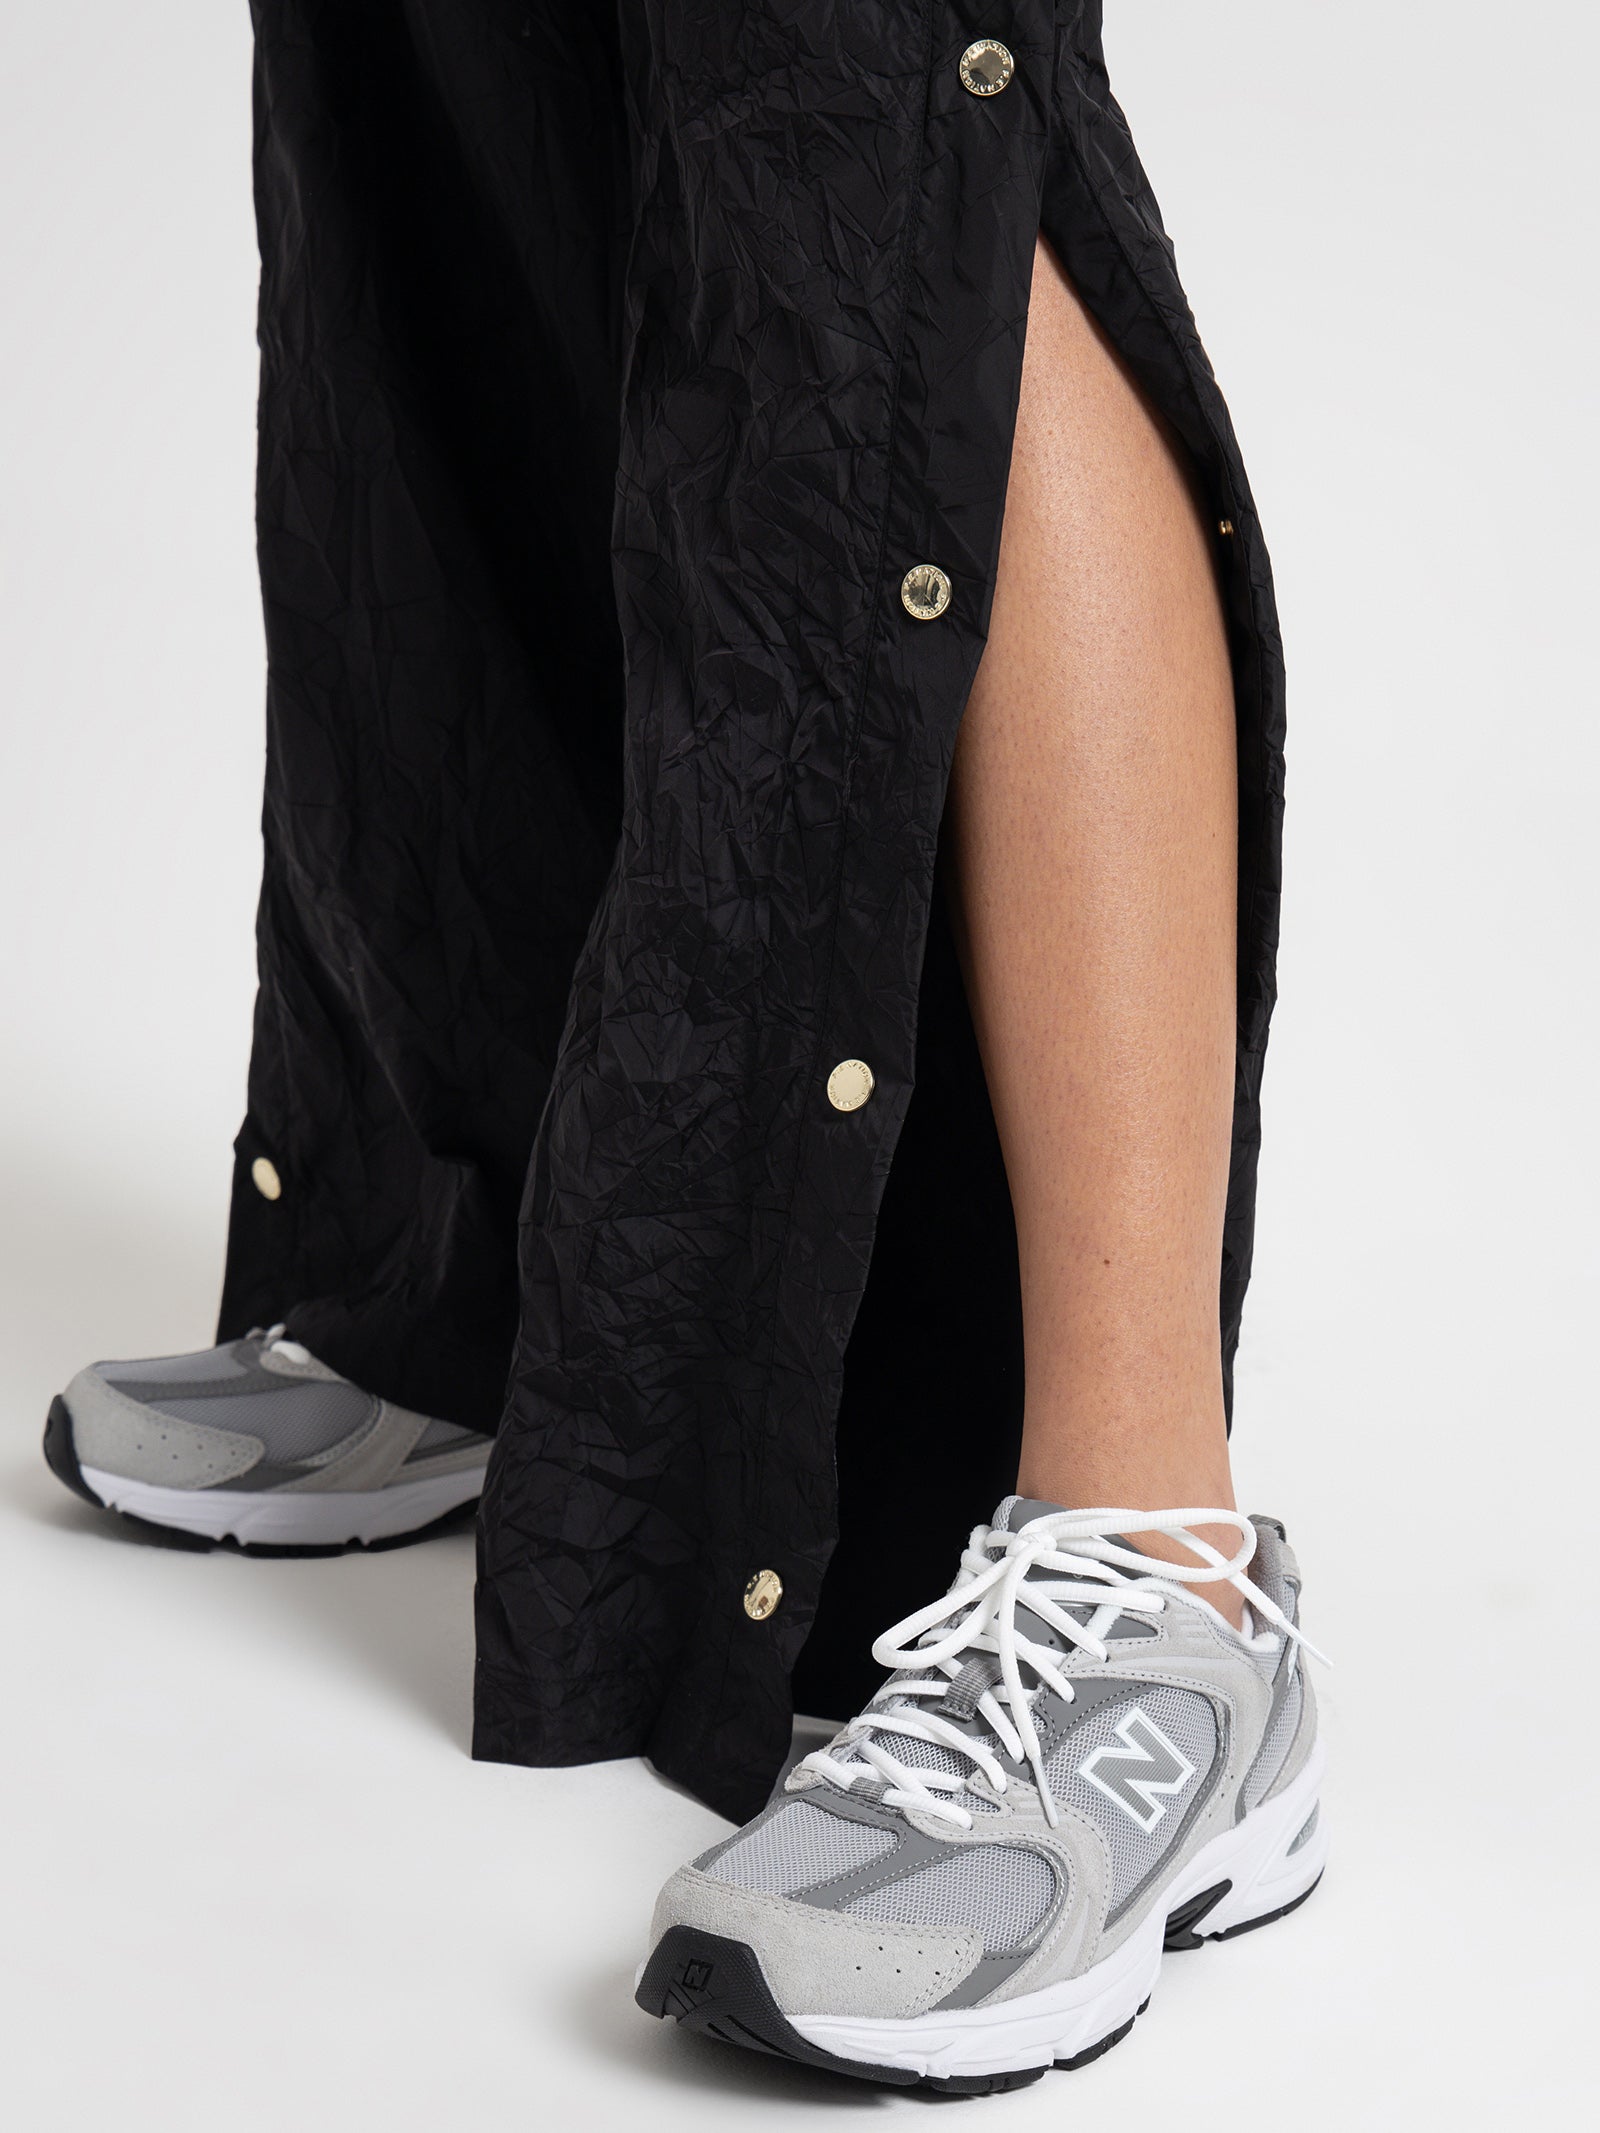 Volley Side Snap Pants in Black & Gold